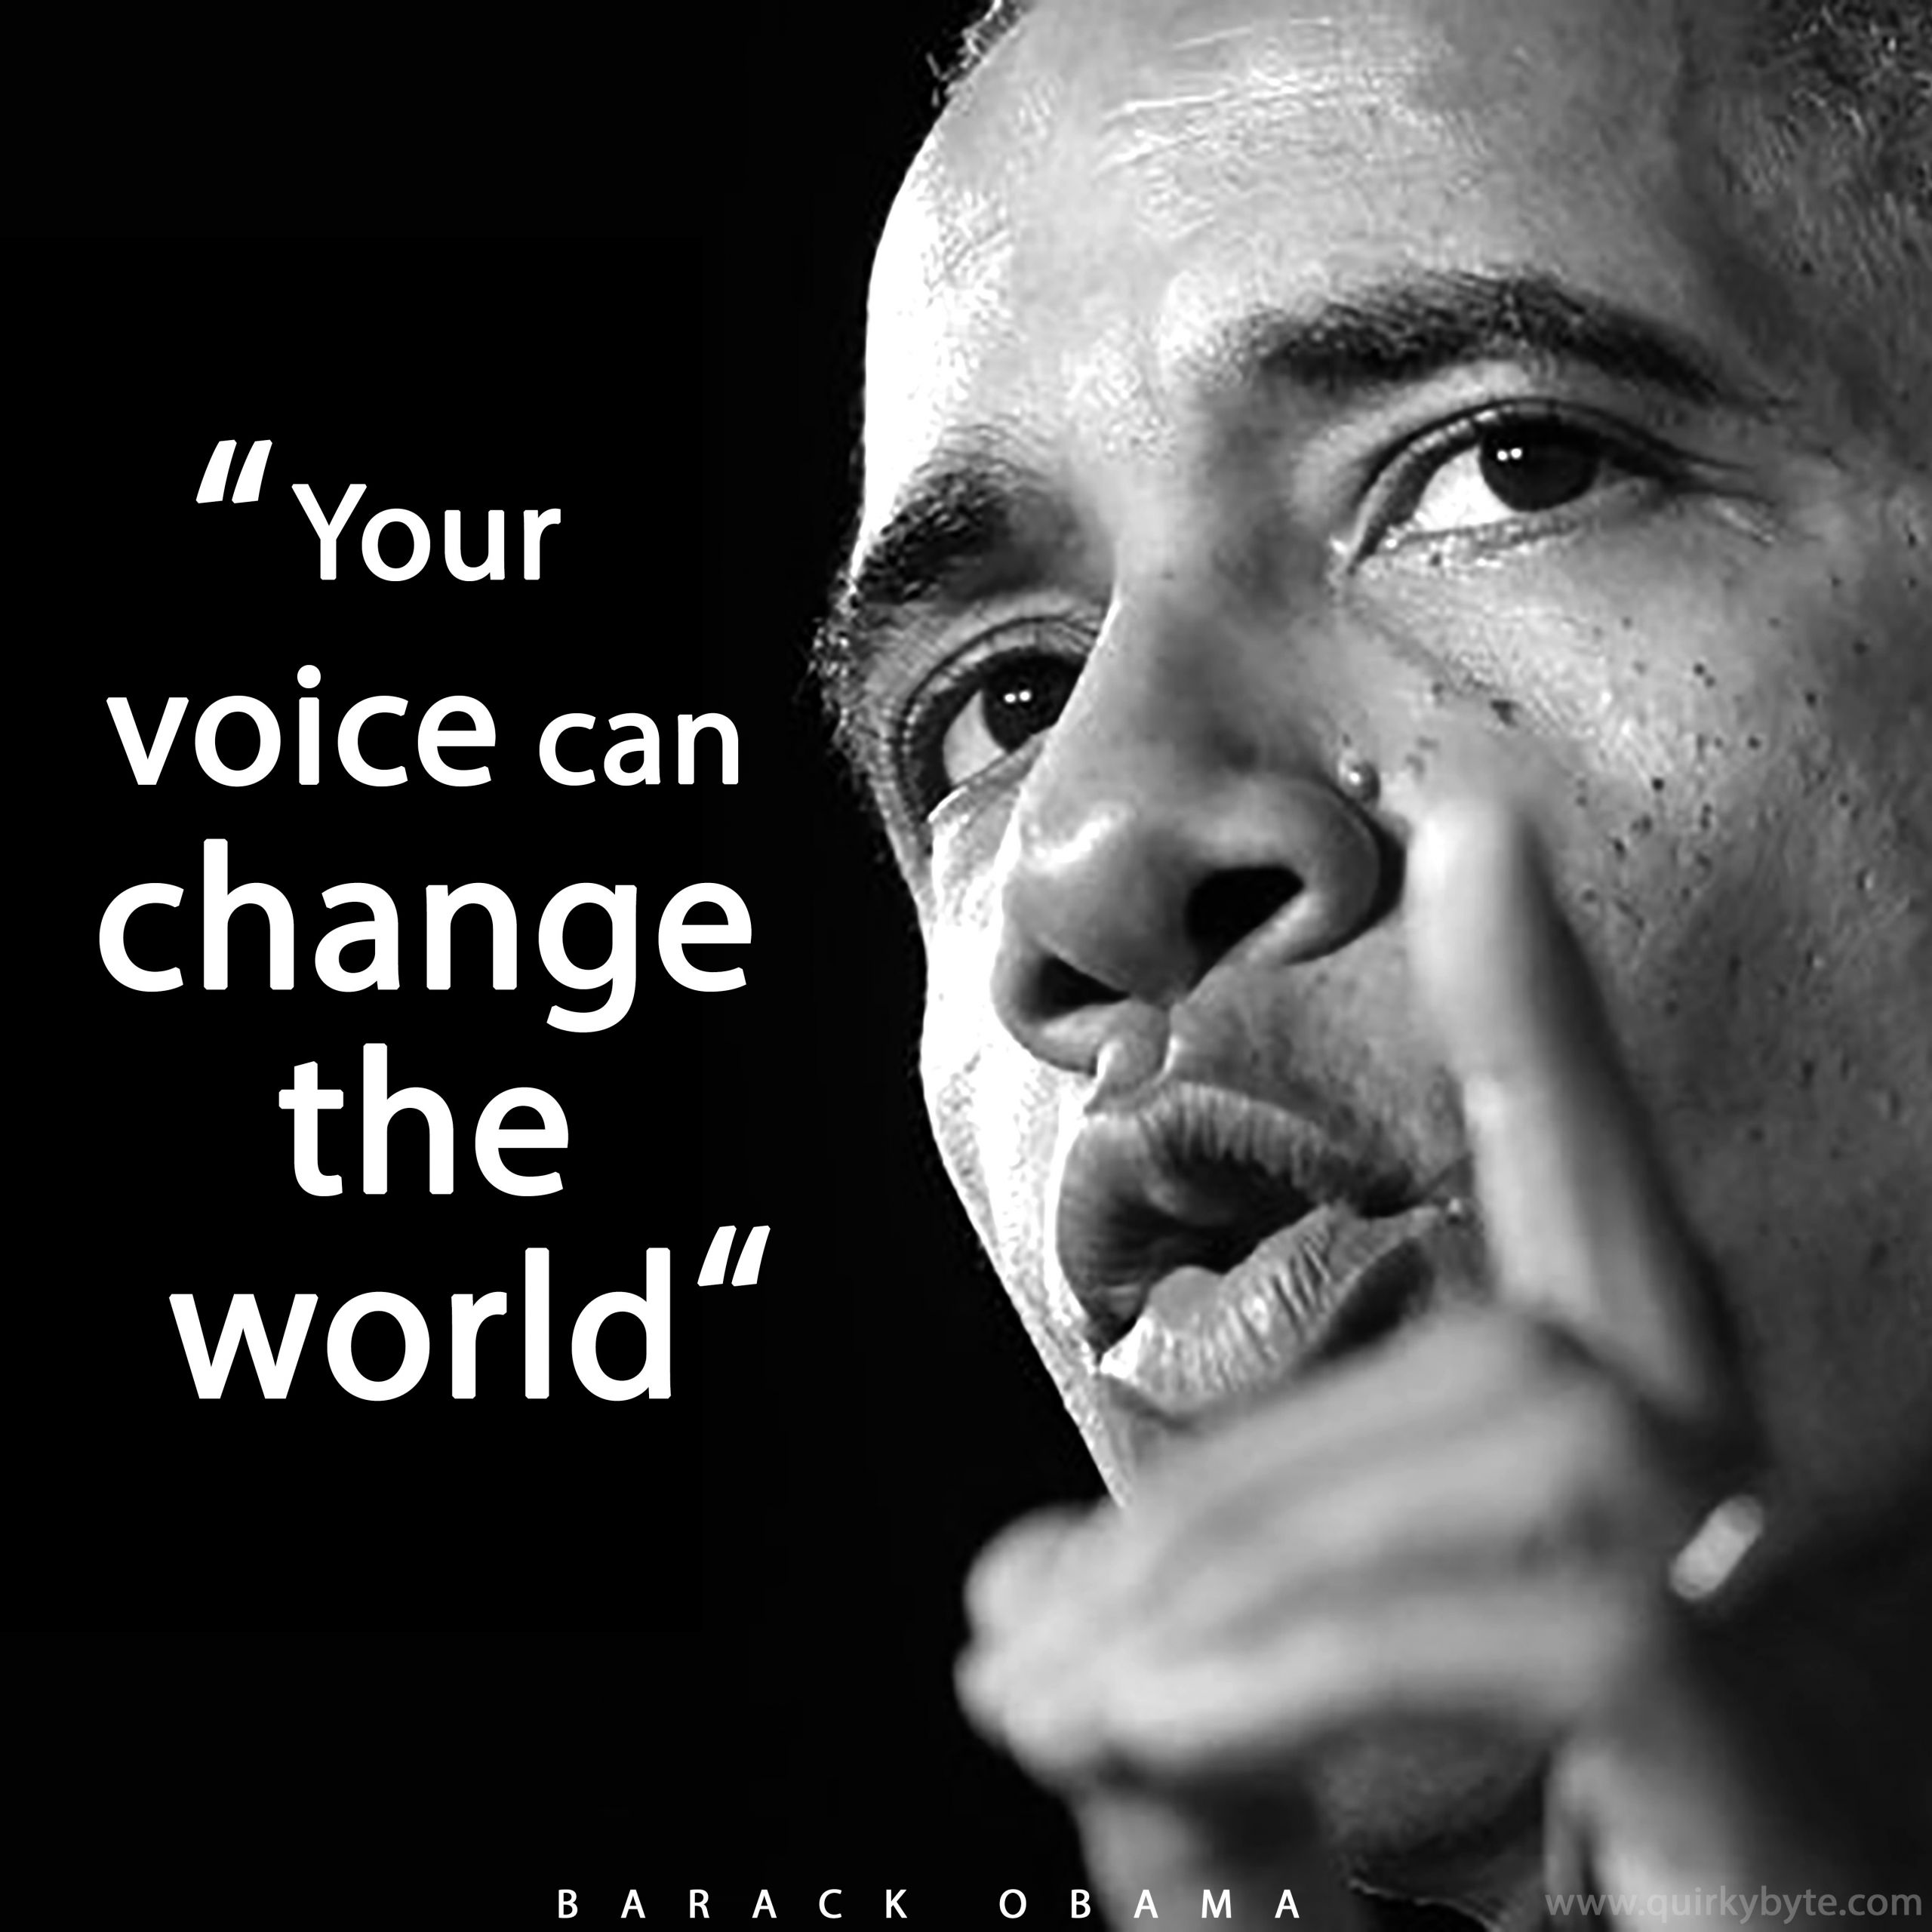 Obama Inspirational Quotes
 7 Inspirational Quotes by Barack Obama for Success